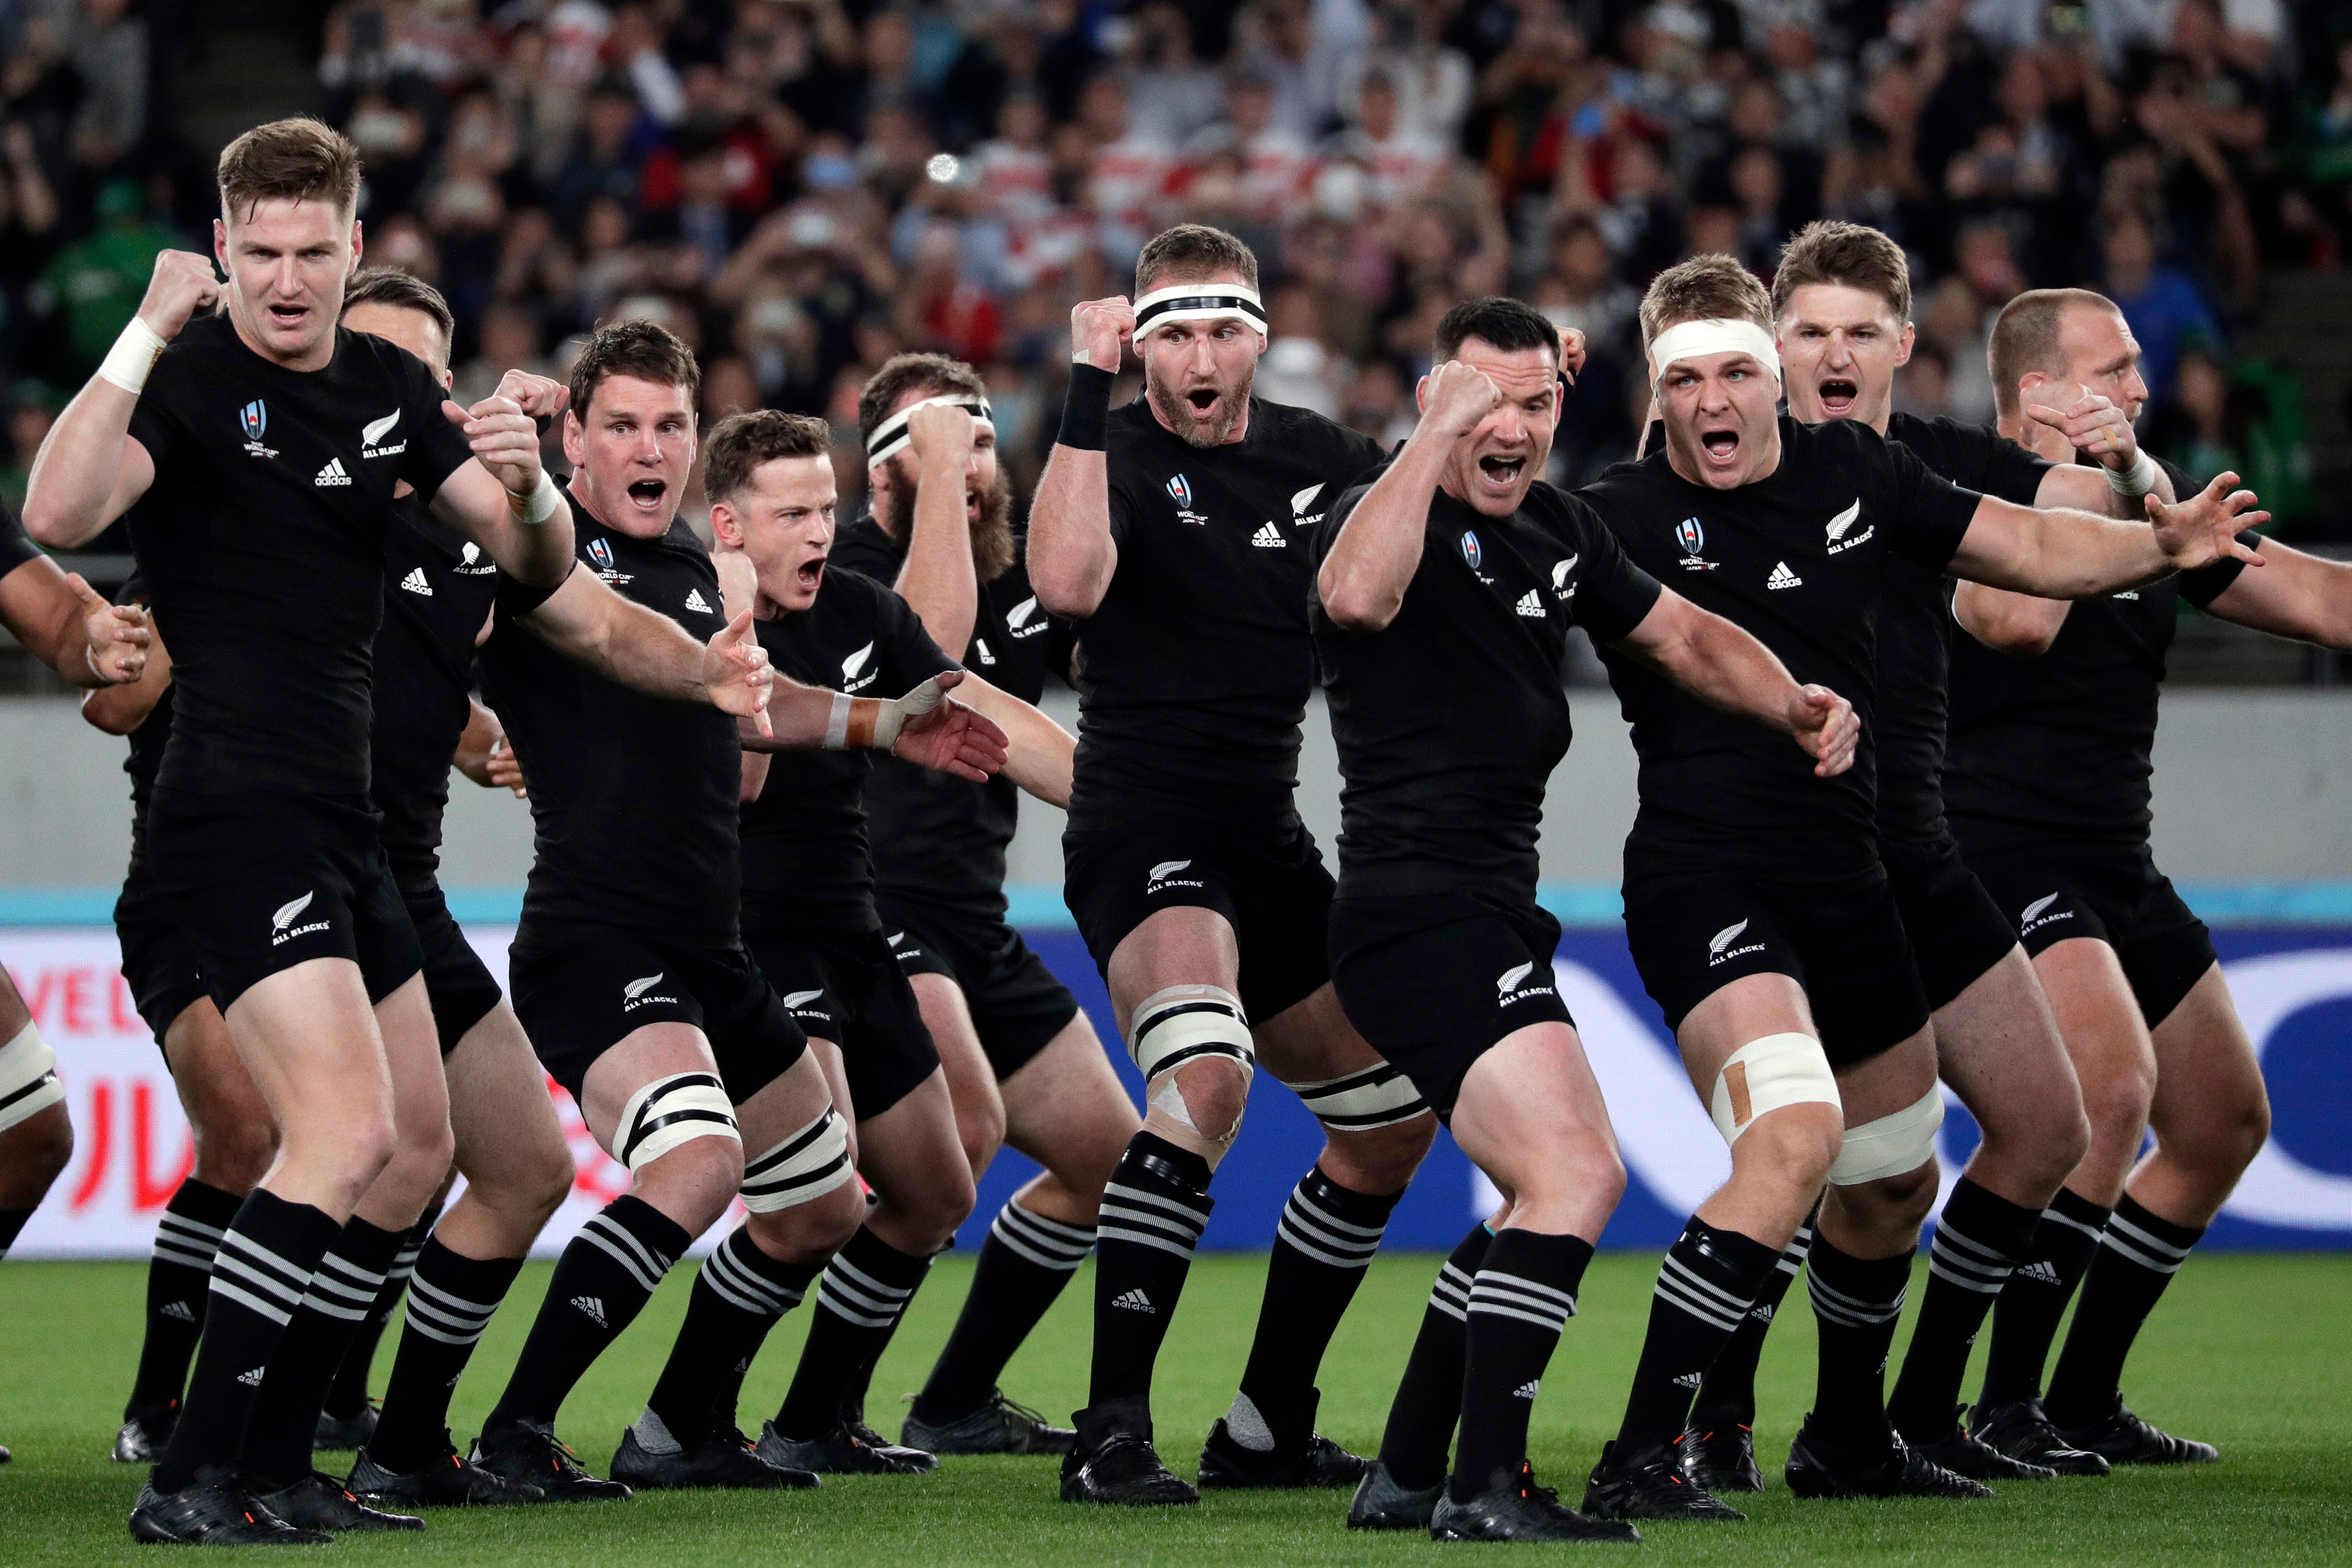 All Blacks players perform the Haka at the World Cup